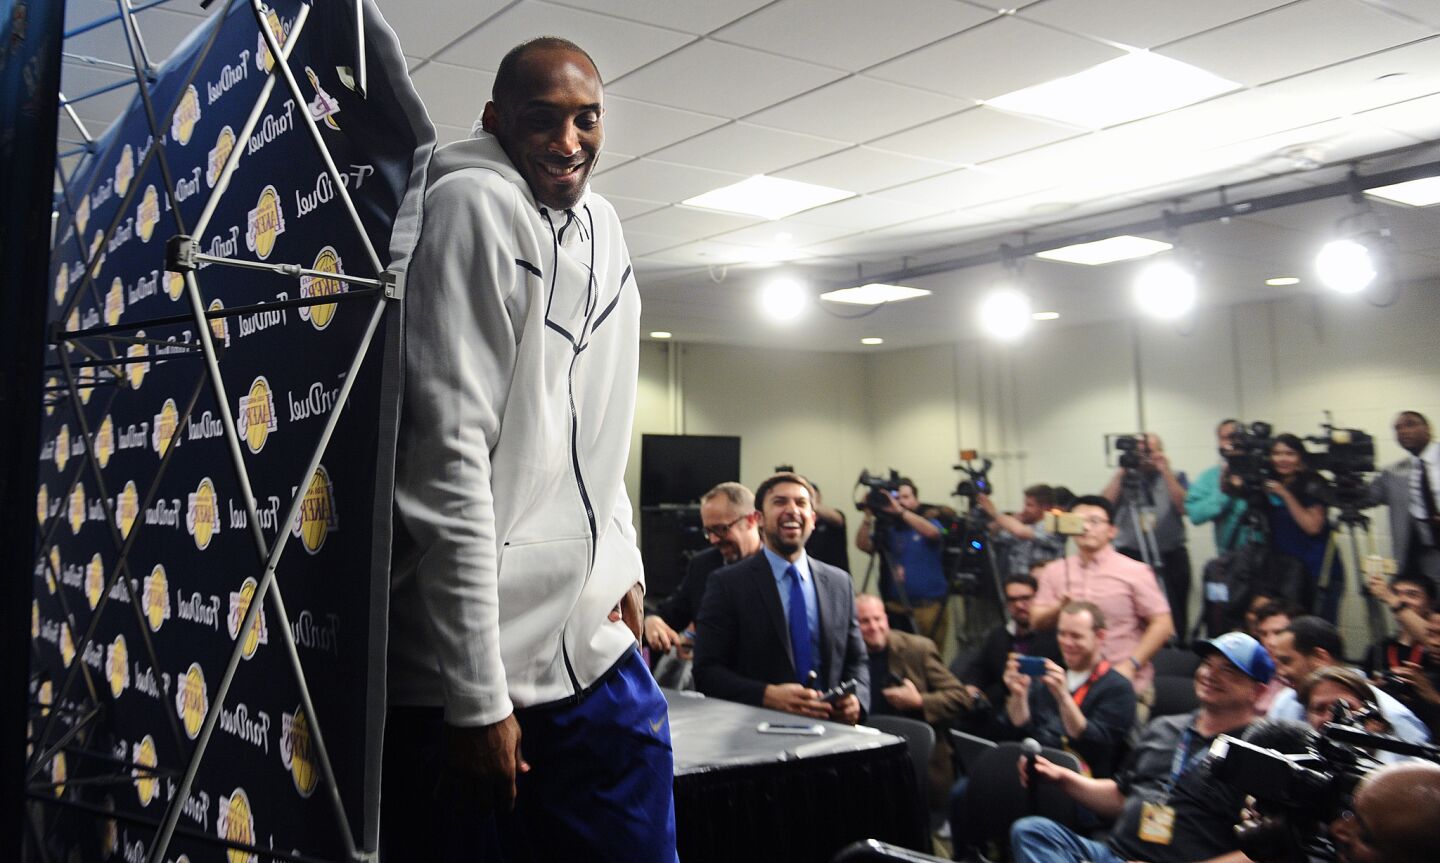 Kobe Bryant leaves a news conference with a laugh after a game against the Thunder in Oklahoma City on April 11.